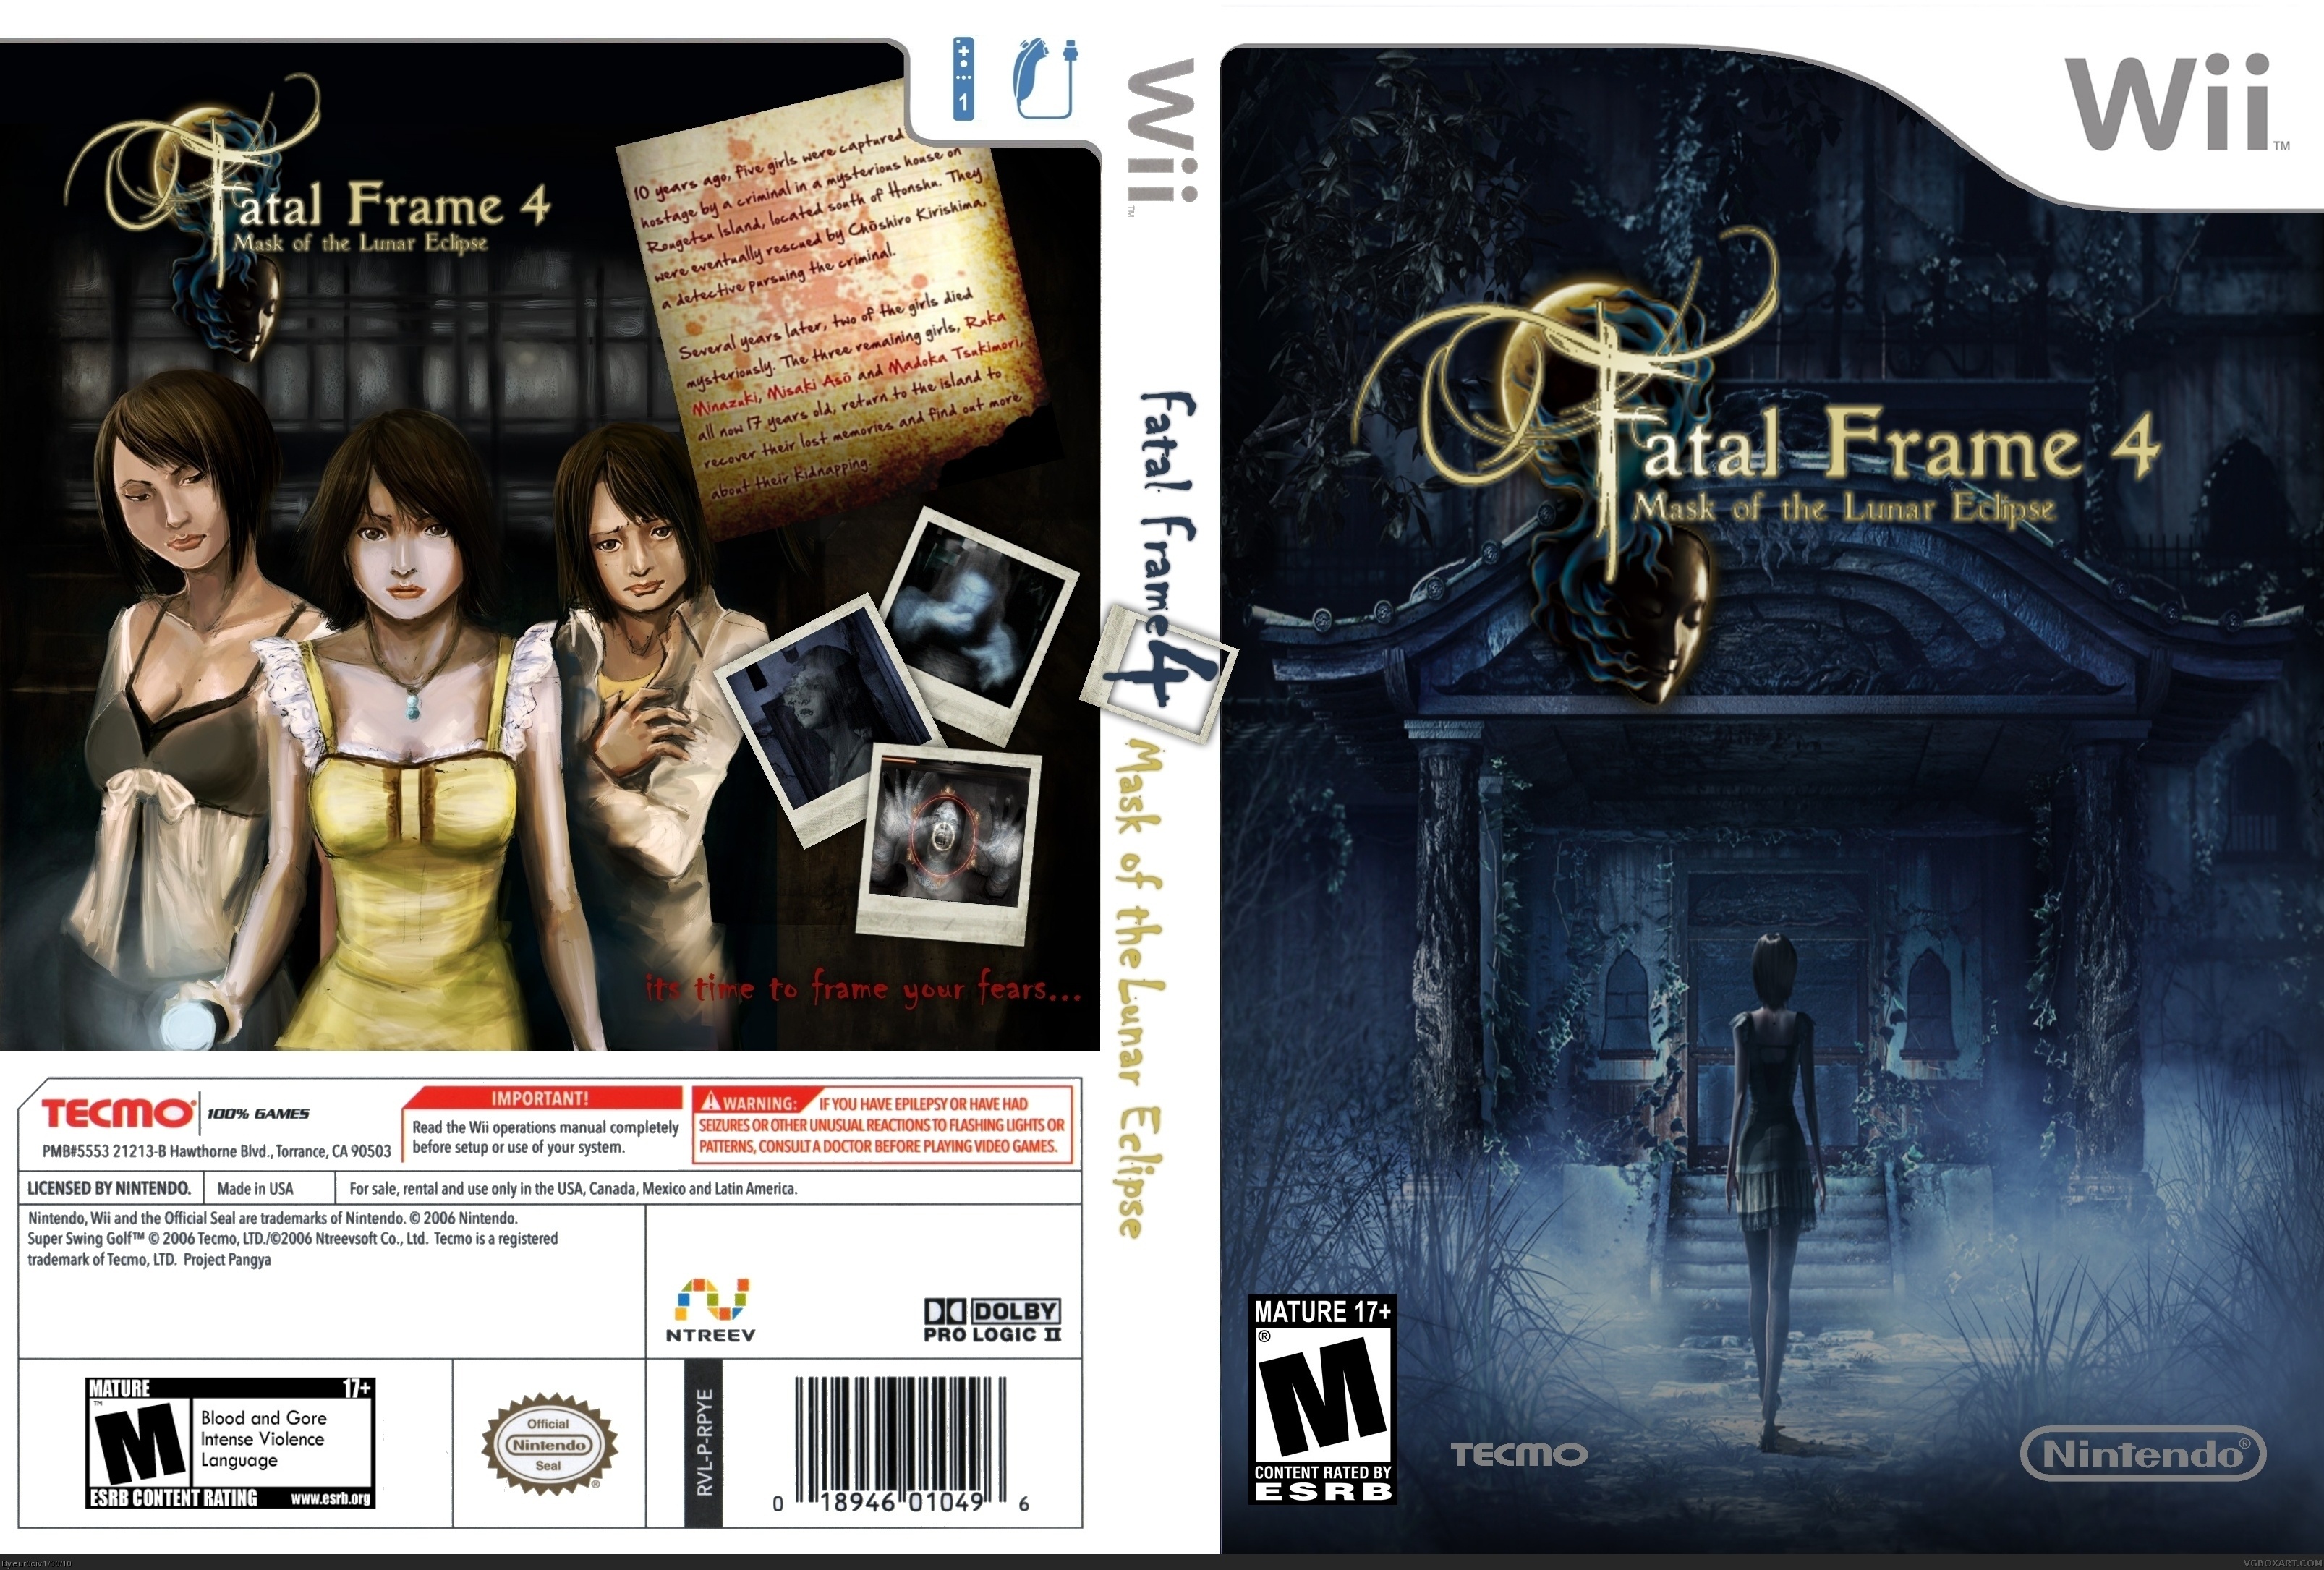 Fatal Frame 4 mask of the Lunar Eclipse box cover